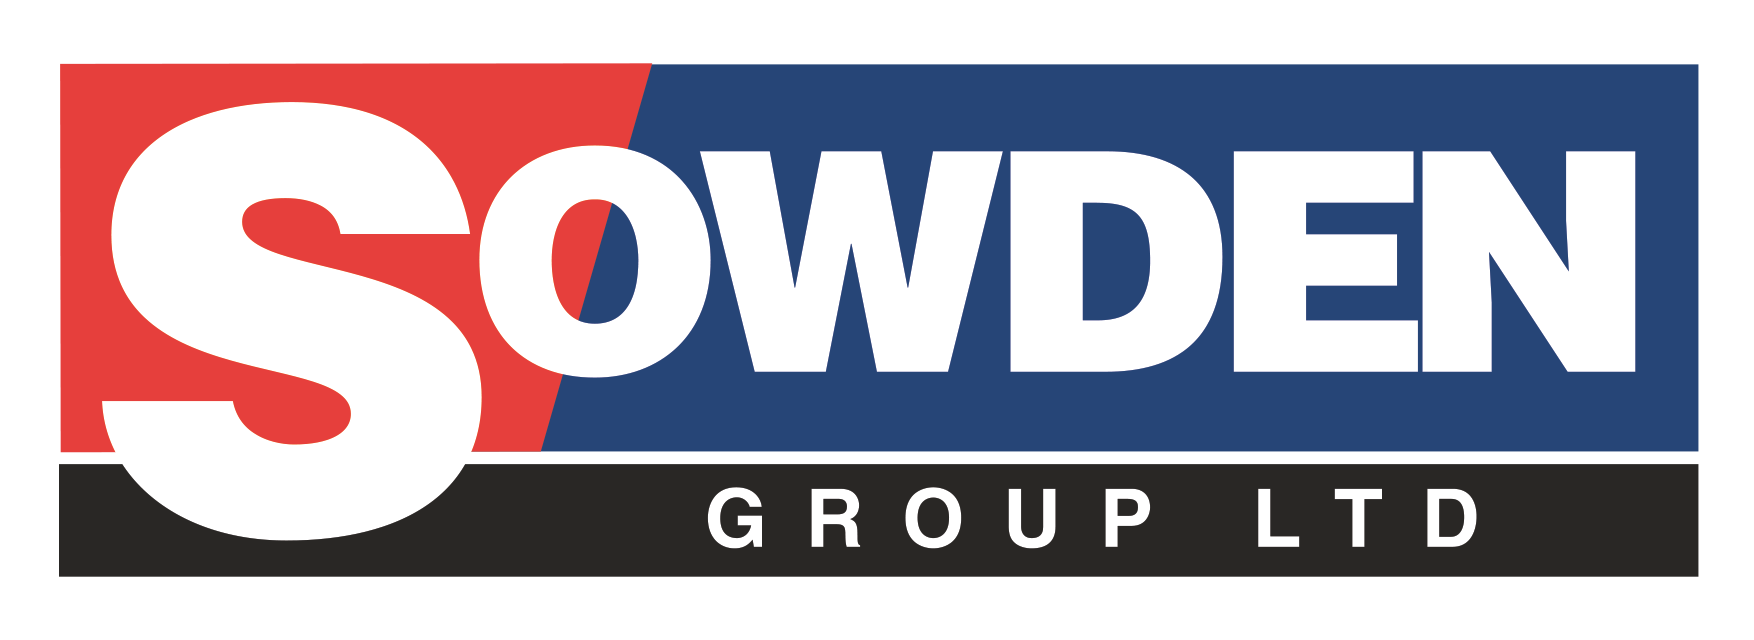 Sowden Group